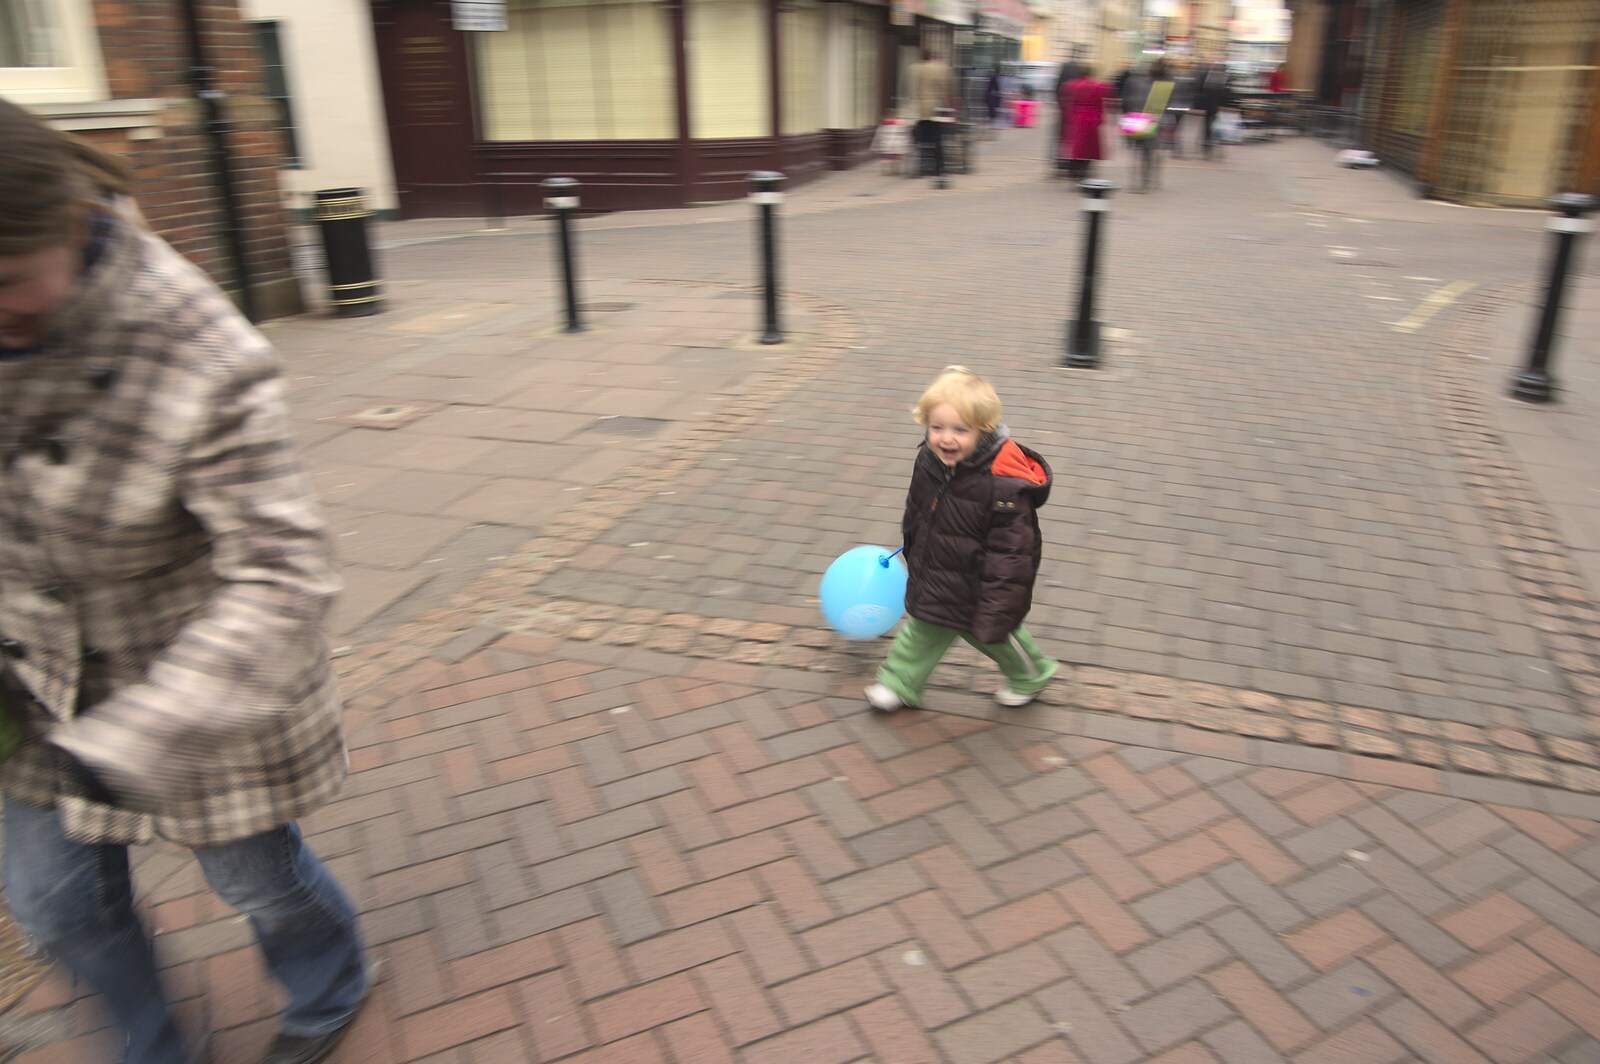 Fred chases Isobel with a balloon on a stick from Pizza in Bury St. Edmunds, Suffolk - 30th January 2011